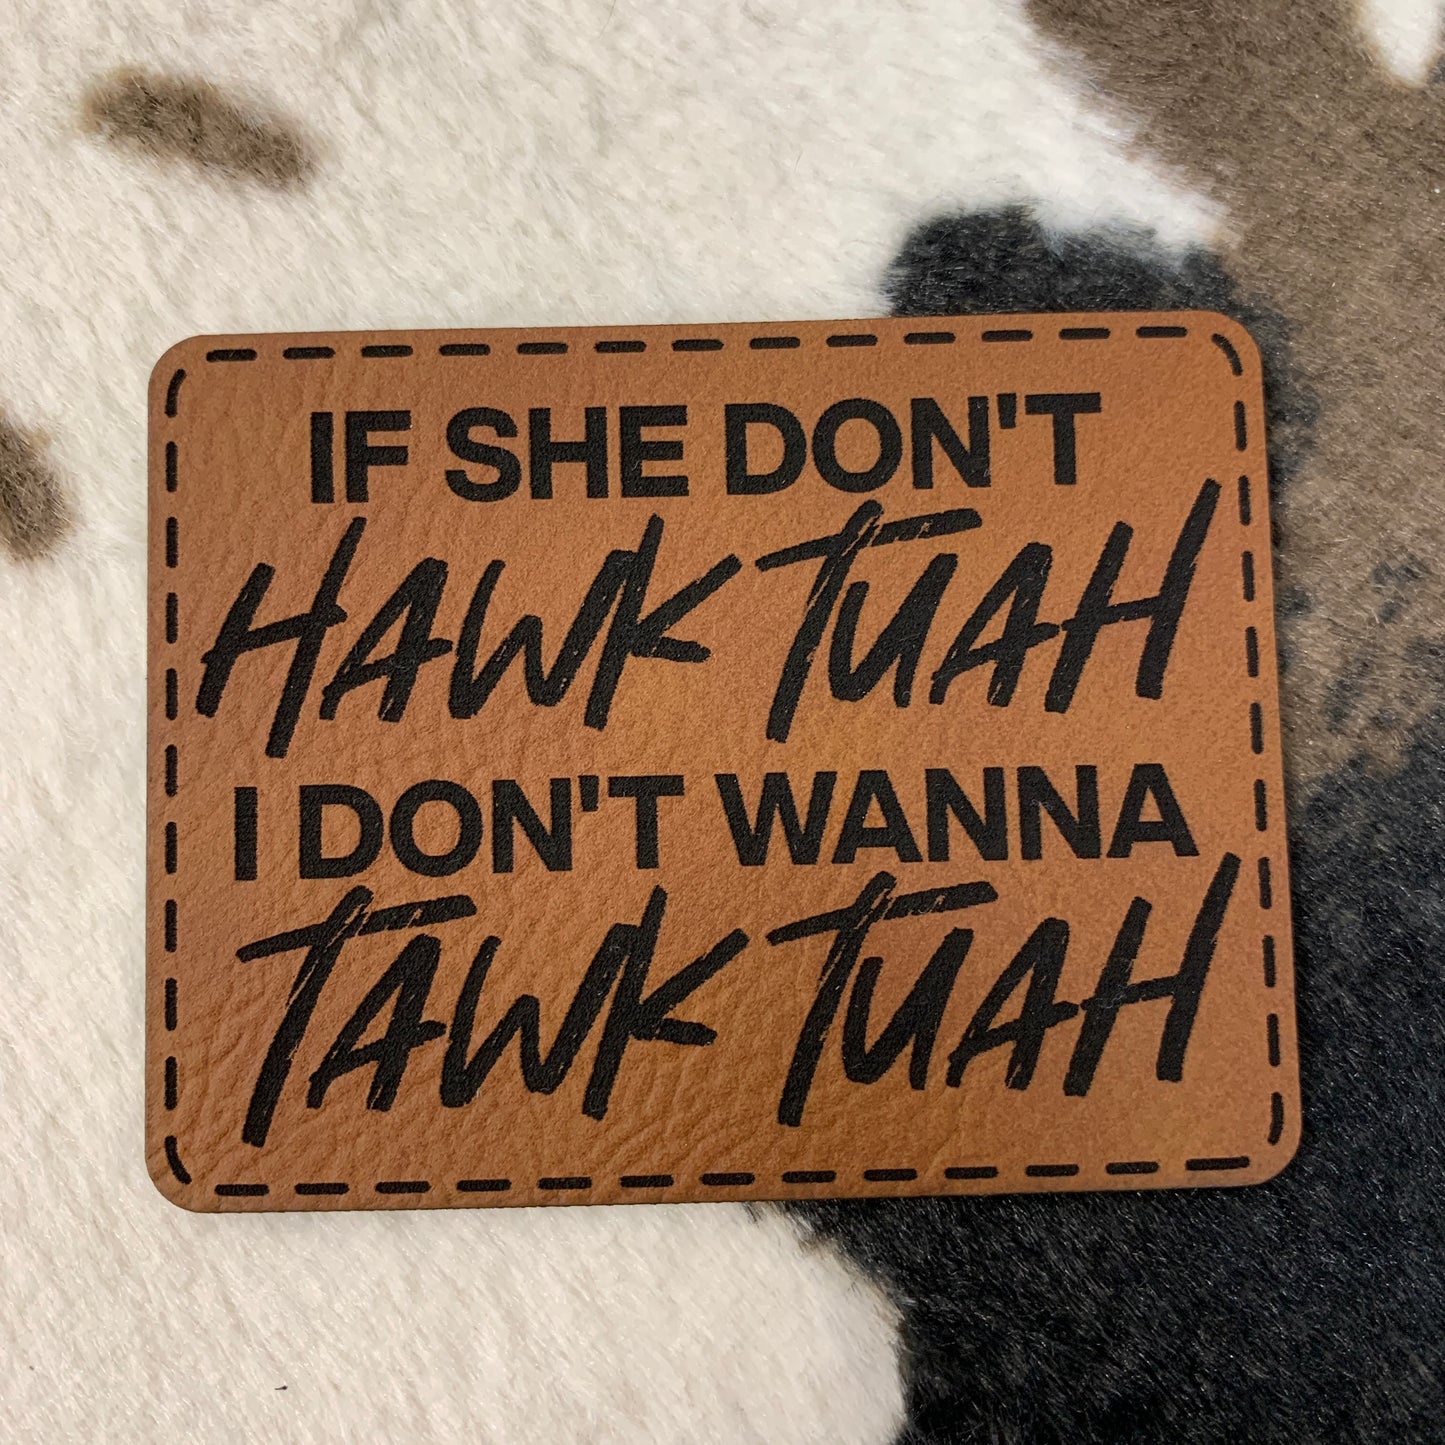 If She Don't Hawk Tuah, I Don't Wanna Tawk Tuah - 3" wide x 2.35" tall Leatherette Patch